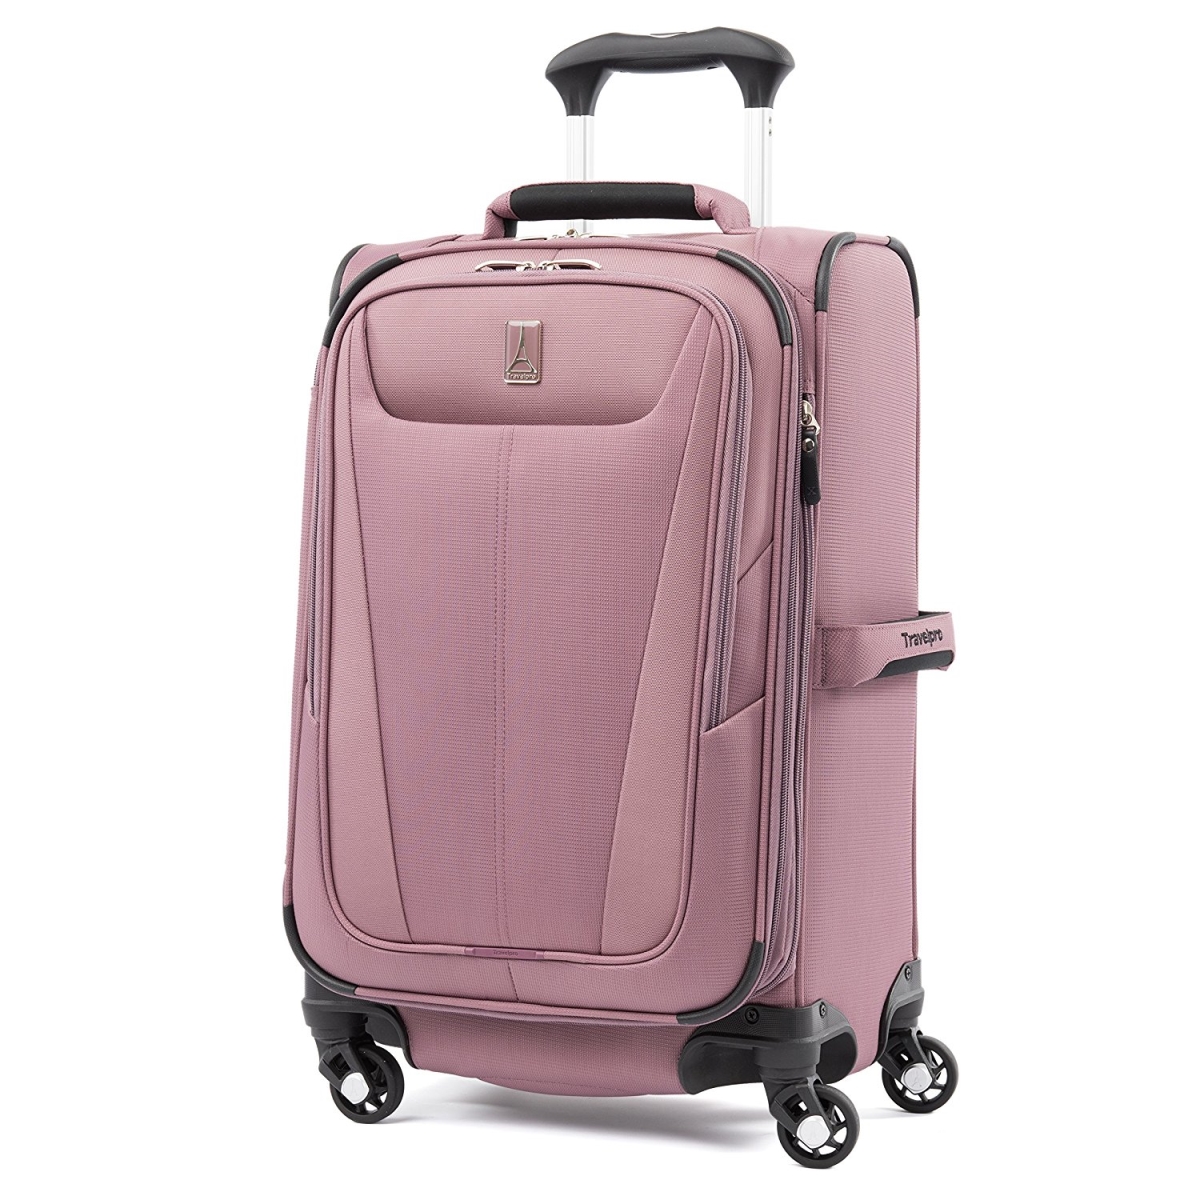 401176707 International Expandable Carry-on Spinner - Dusty Rose